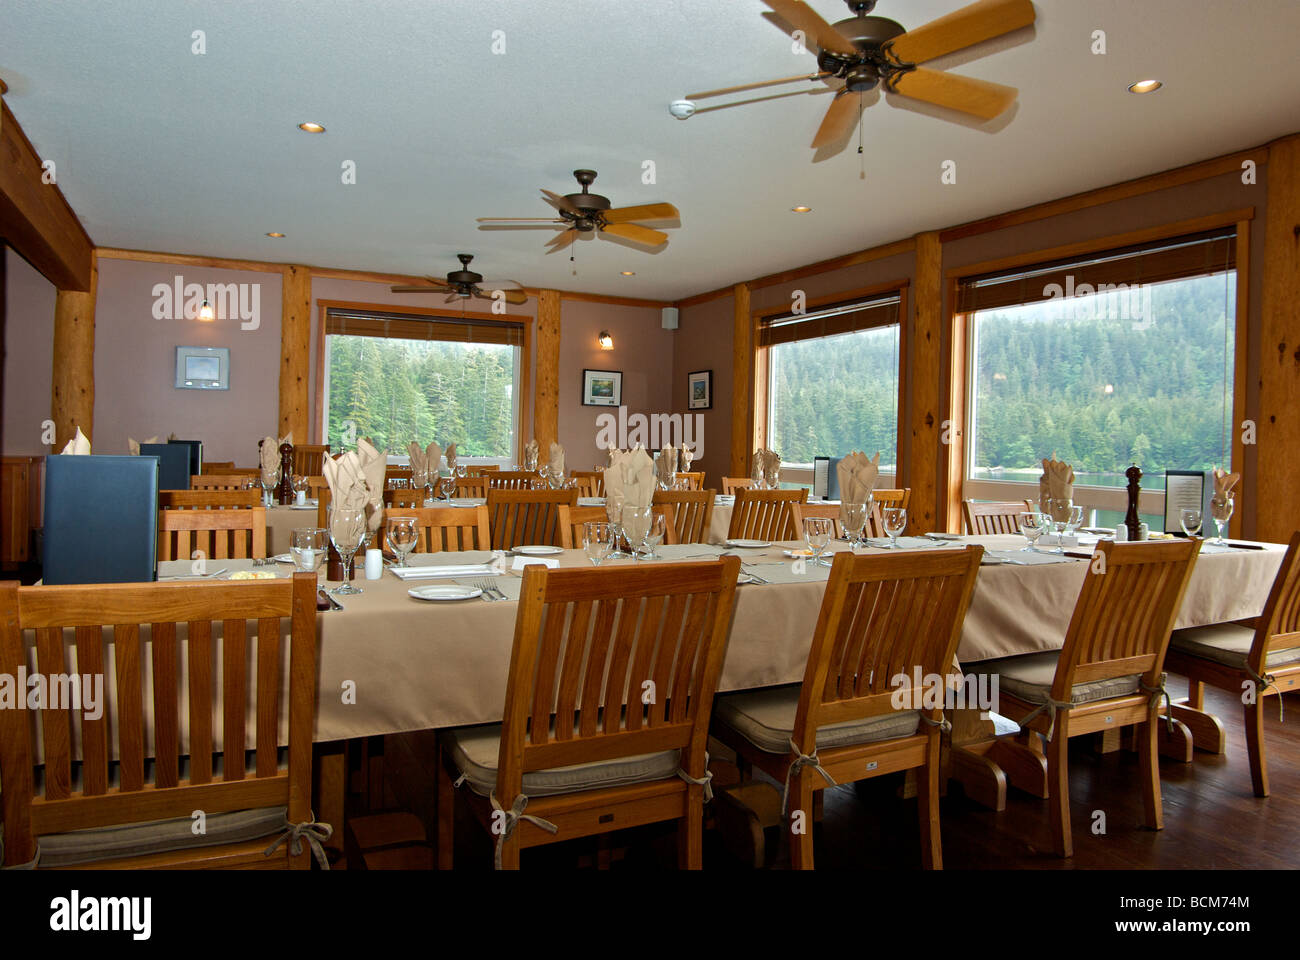 https://c8.alamy.com/comp/BCM74M/fishing-resort-dining-room-with-tables-set-for-supper-in-haida-gwaii-BCM74M.jpg